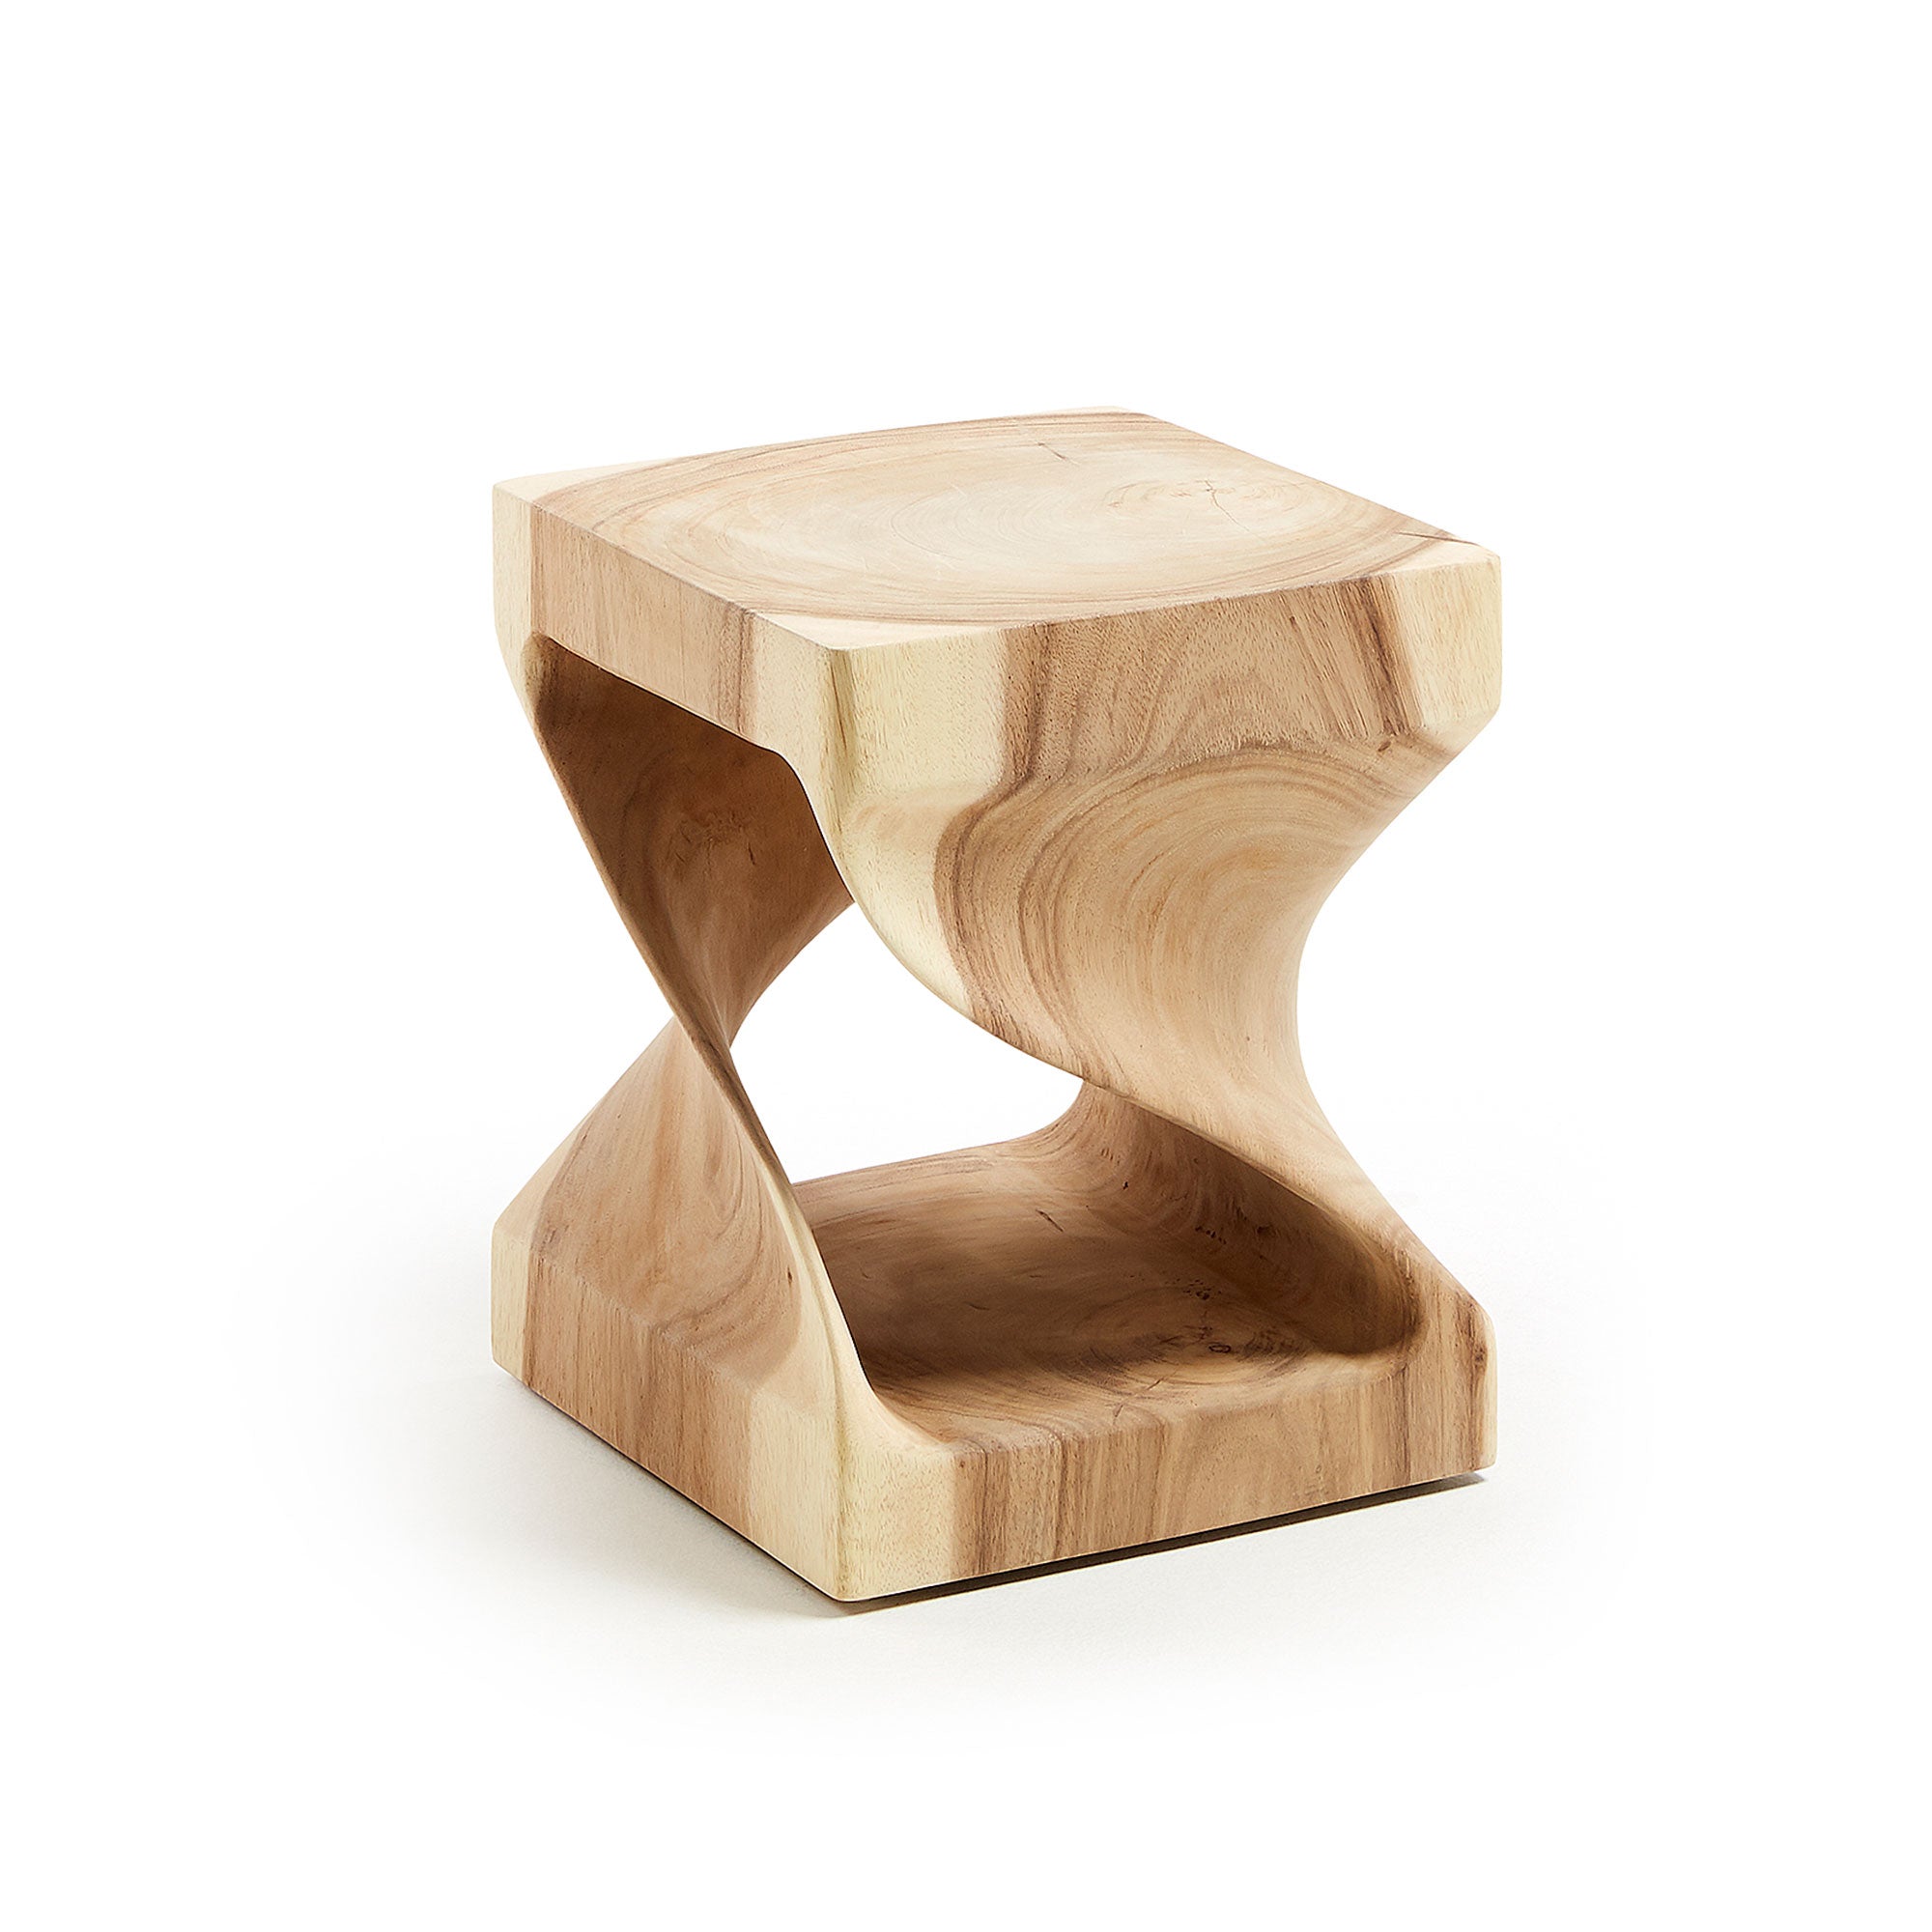 Hakon solid rain tree wood side table with carved interior, 30 x 30 cm